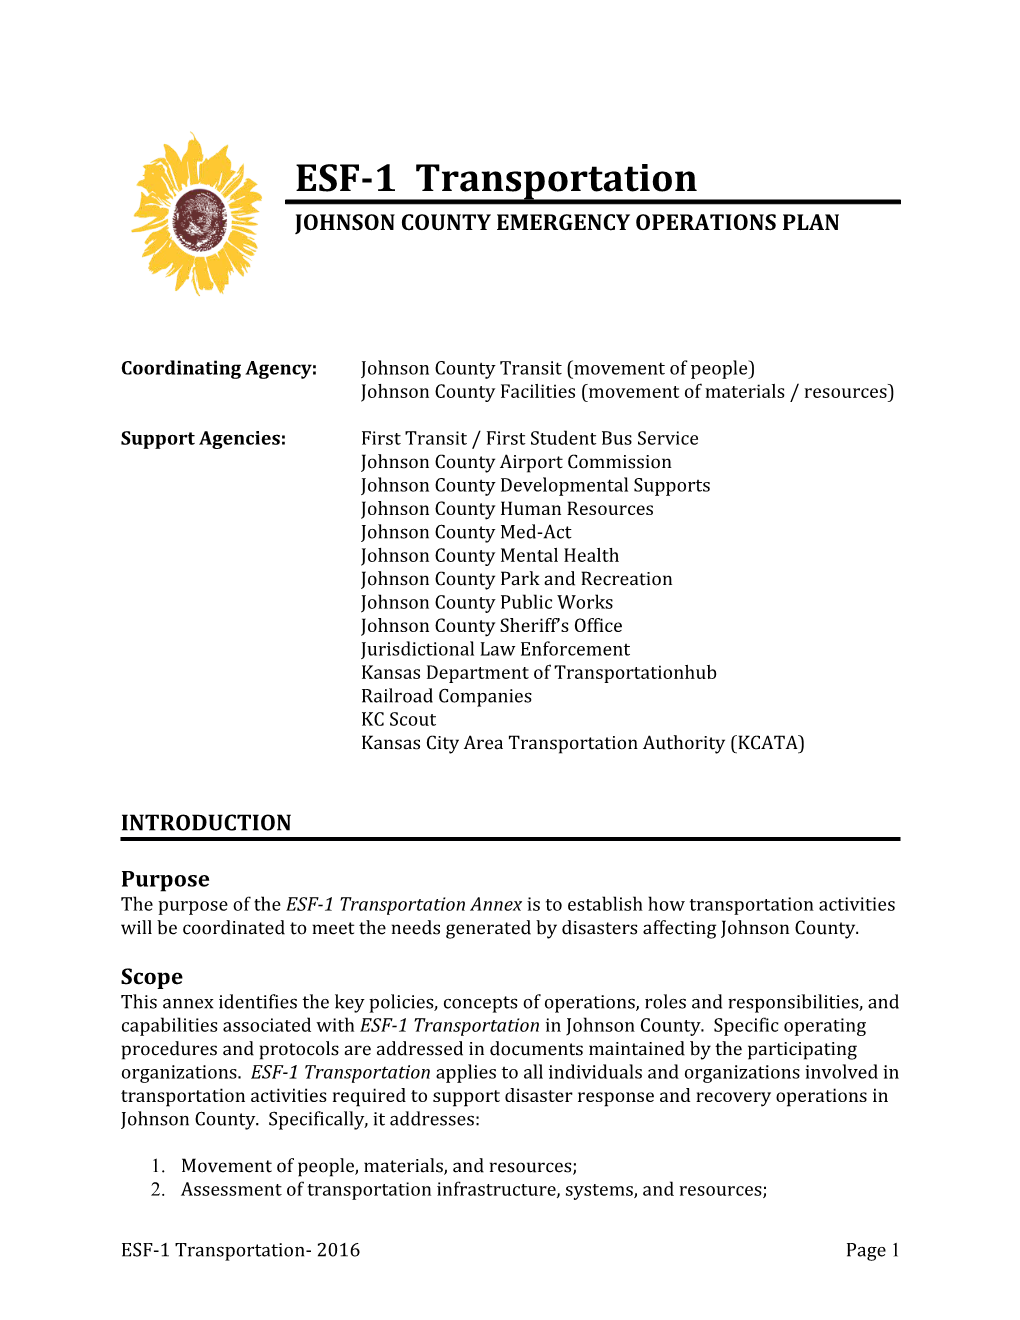 Coordinating Agency: Johnson County Transit (Movement of People)